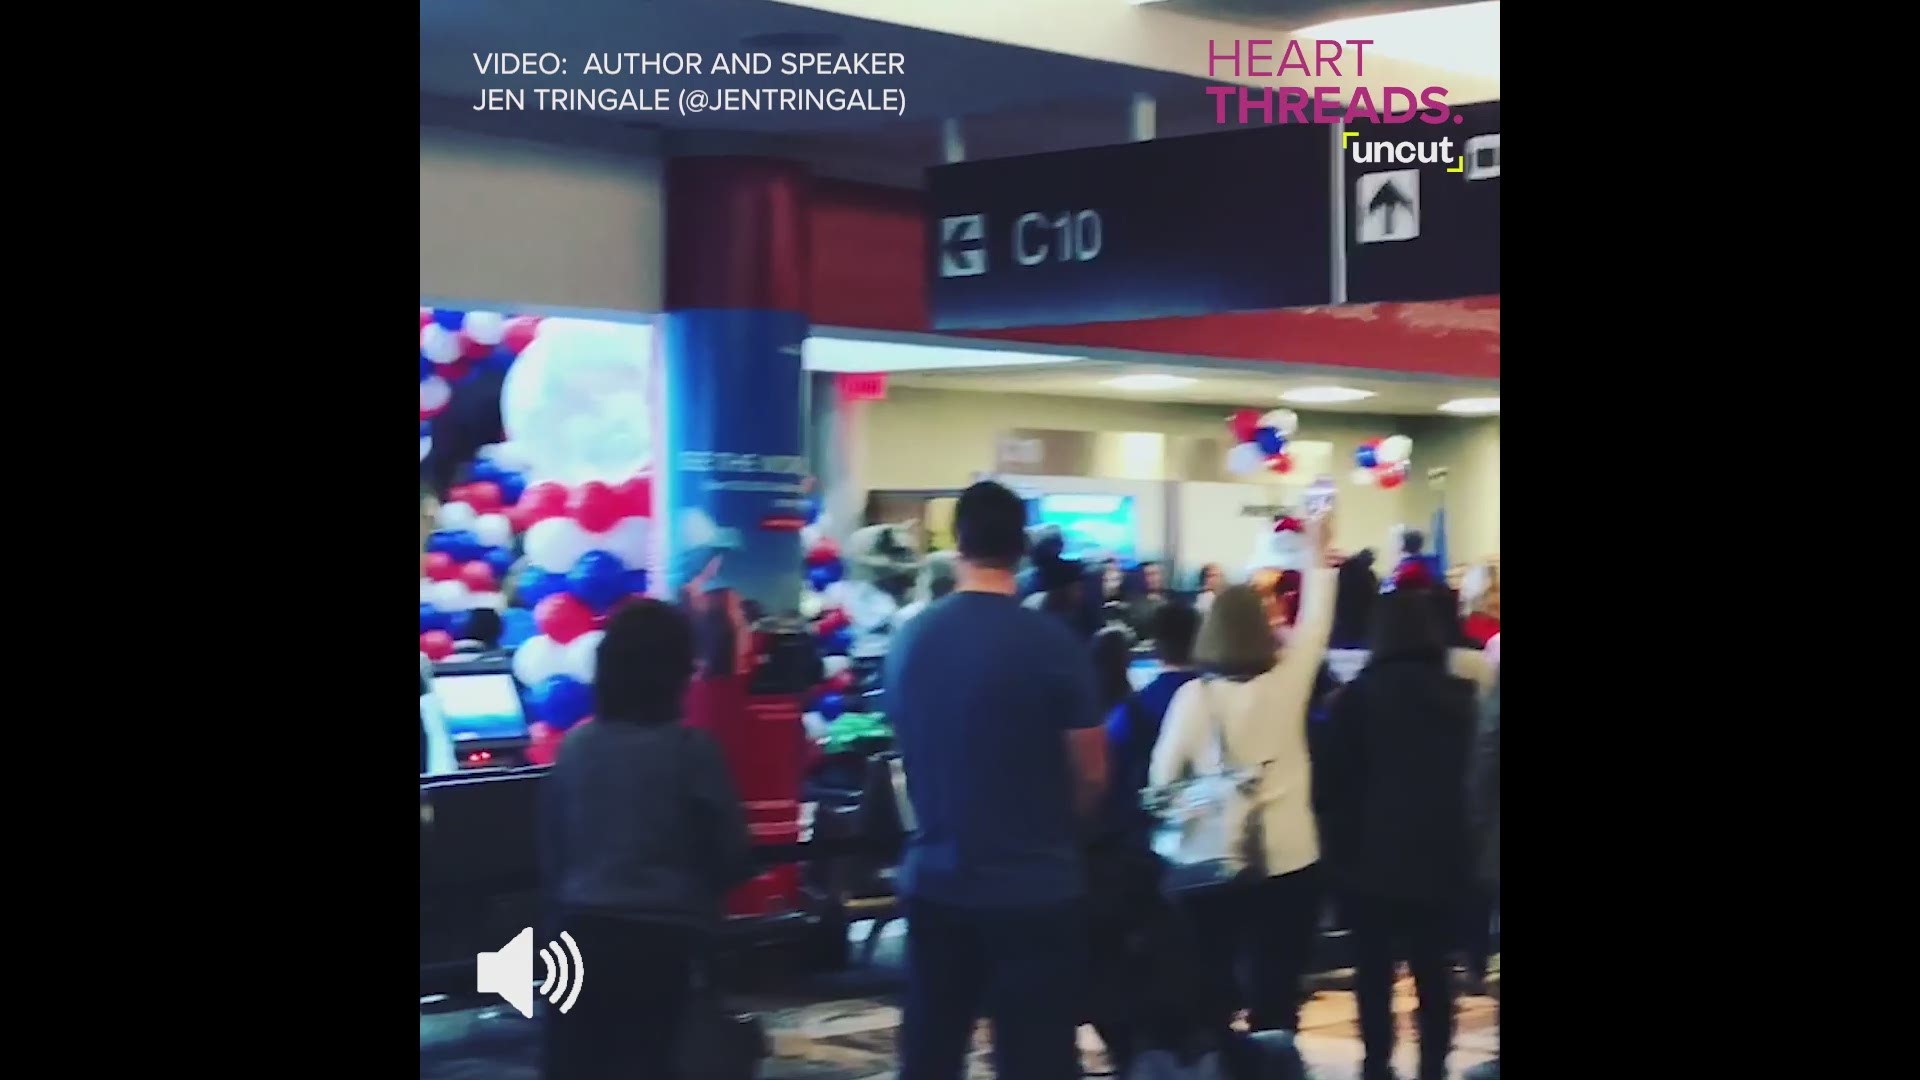 Travelers at a Nashville airport stopped what they were doing and joined in singing the national anthem as more than 100 children who lost a parent in combat headed off on a special trip to Disney World. (Video: Jen Tringale @JenTringale)